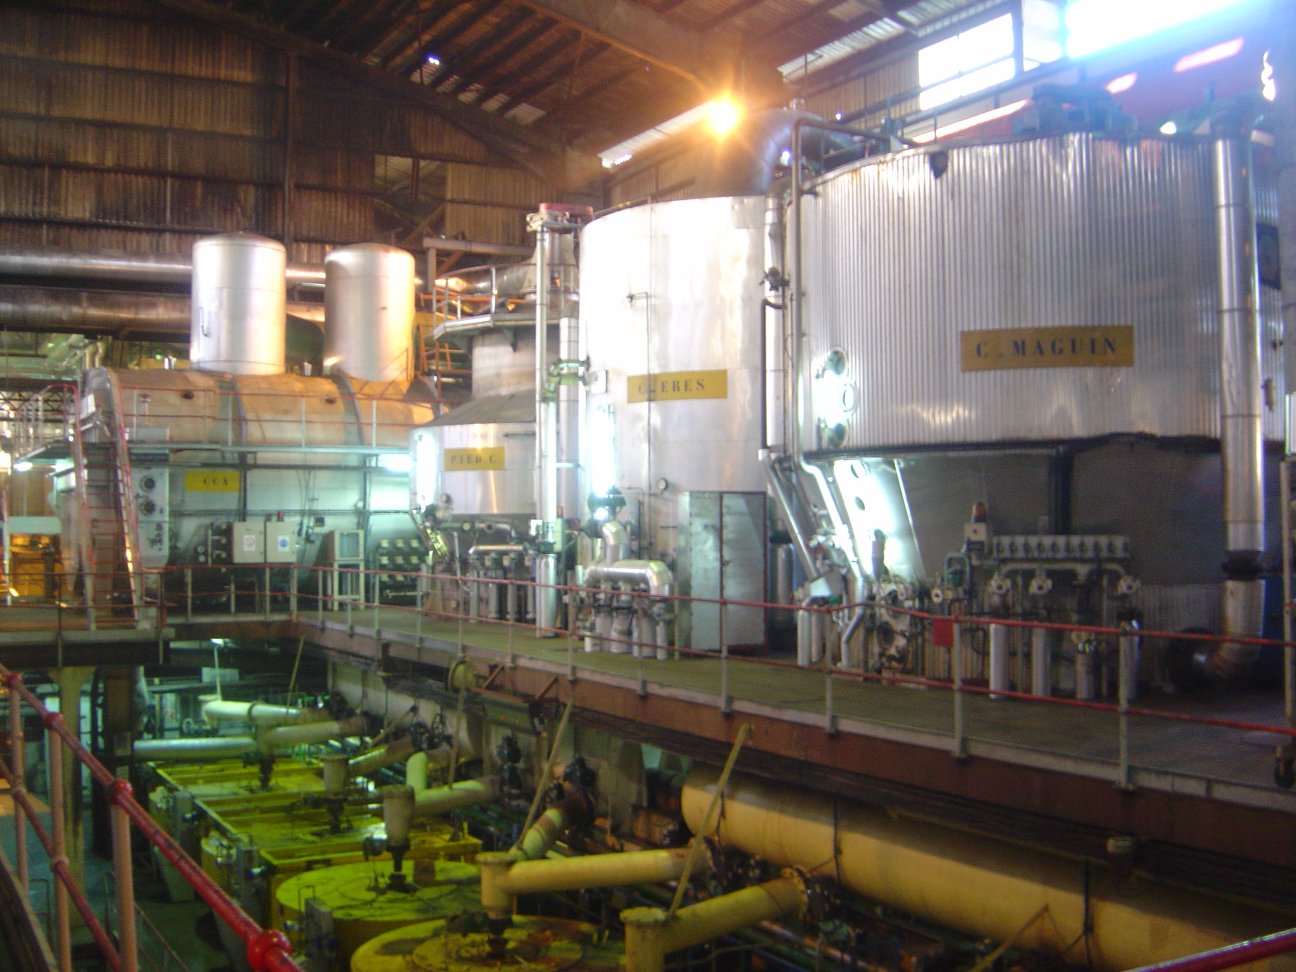 Photograph of sugar vacuum pans and centrifugals in a sugar factory on Réunion island. The photo shows the interior of a plant with cylindrical silver vacuum pans and a row of centrifugals that are on a floor below them. The centrifugals are somewhat difficult to see.